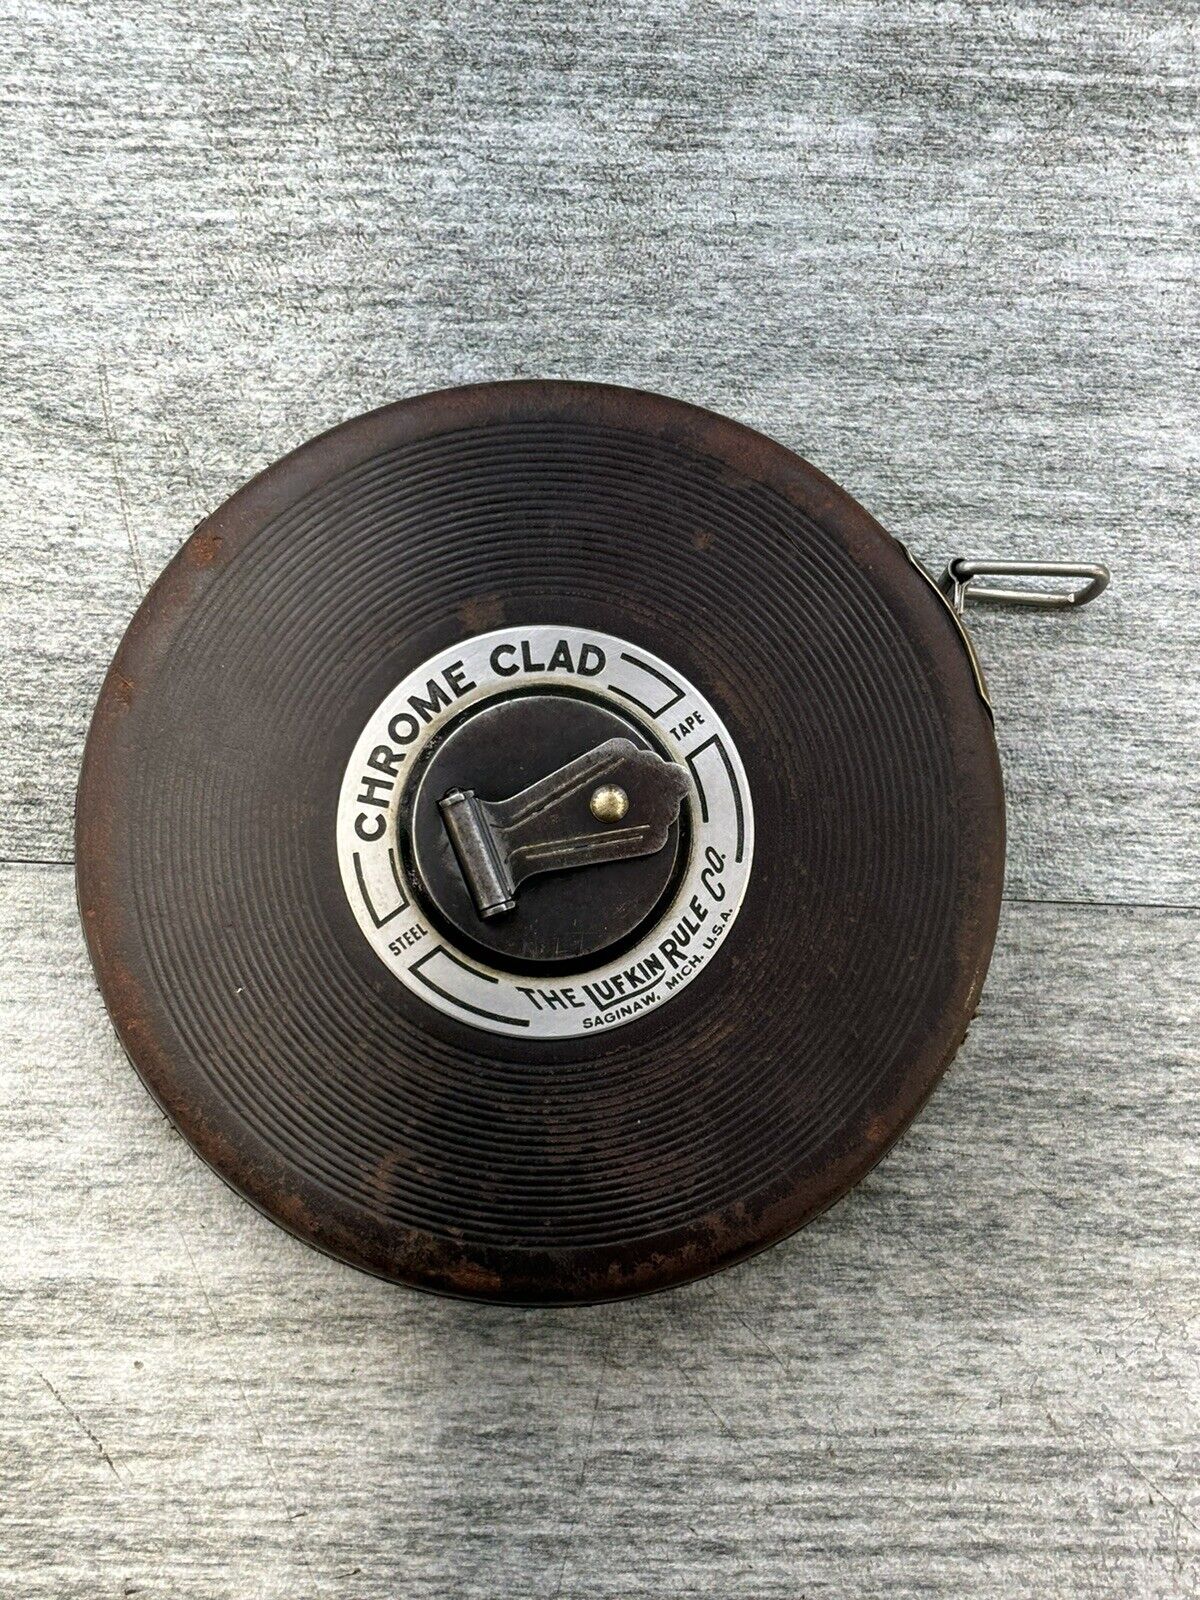 VTG Lufkin Rule Chrome Clad Anchor 100’ Steel Tape Measure Hand Wind USA Leather